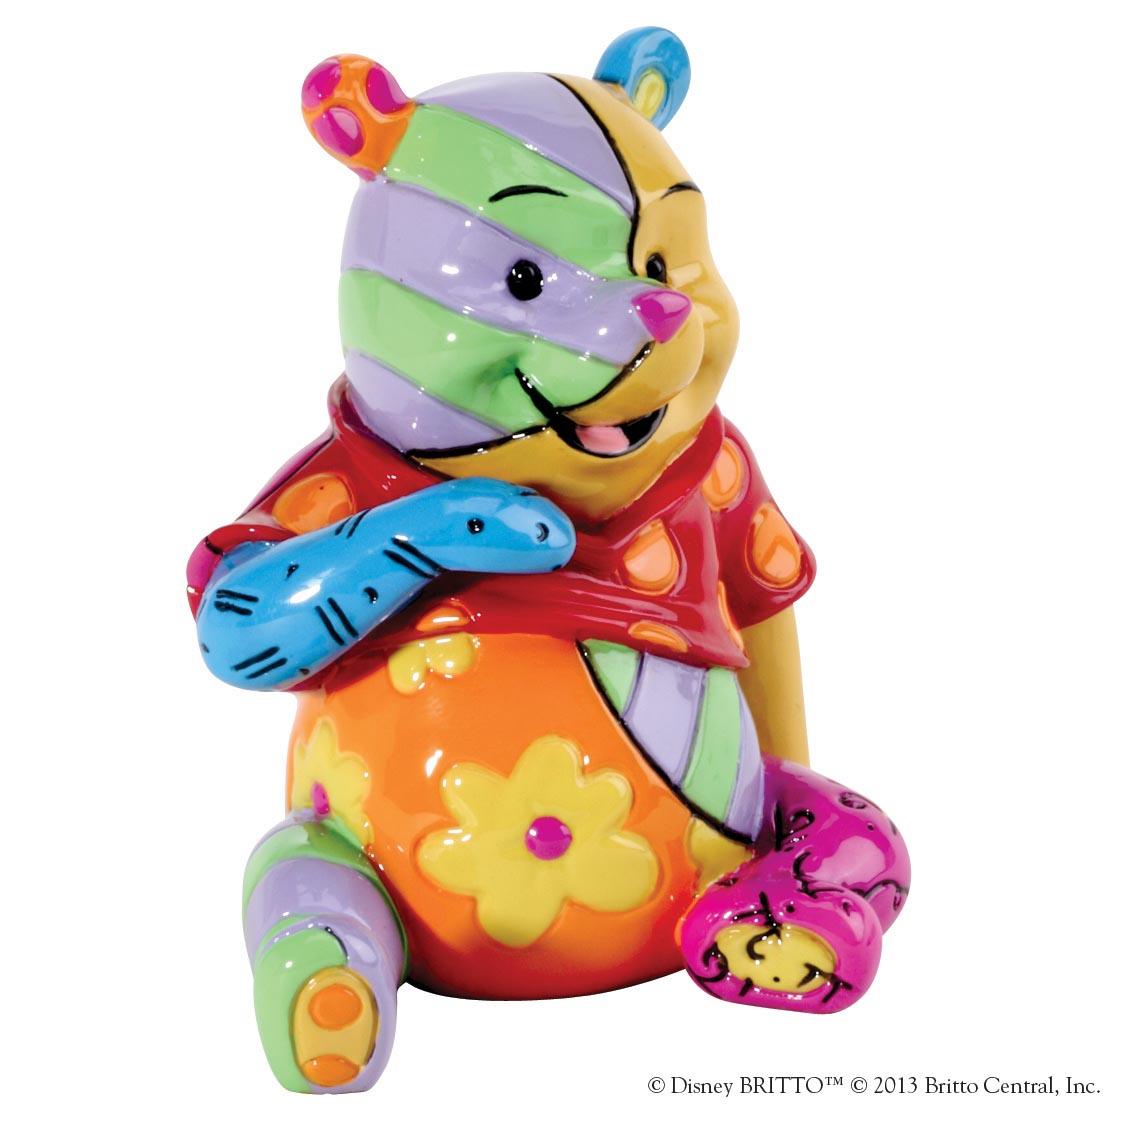 Winnie the Pooh Mini Figurine (Disney Britto Collection) - Gallery Gifts Online 